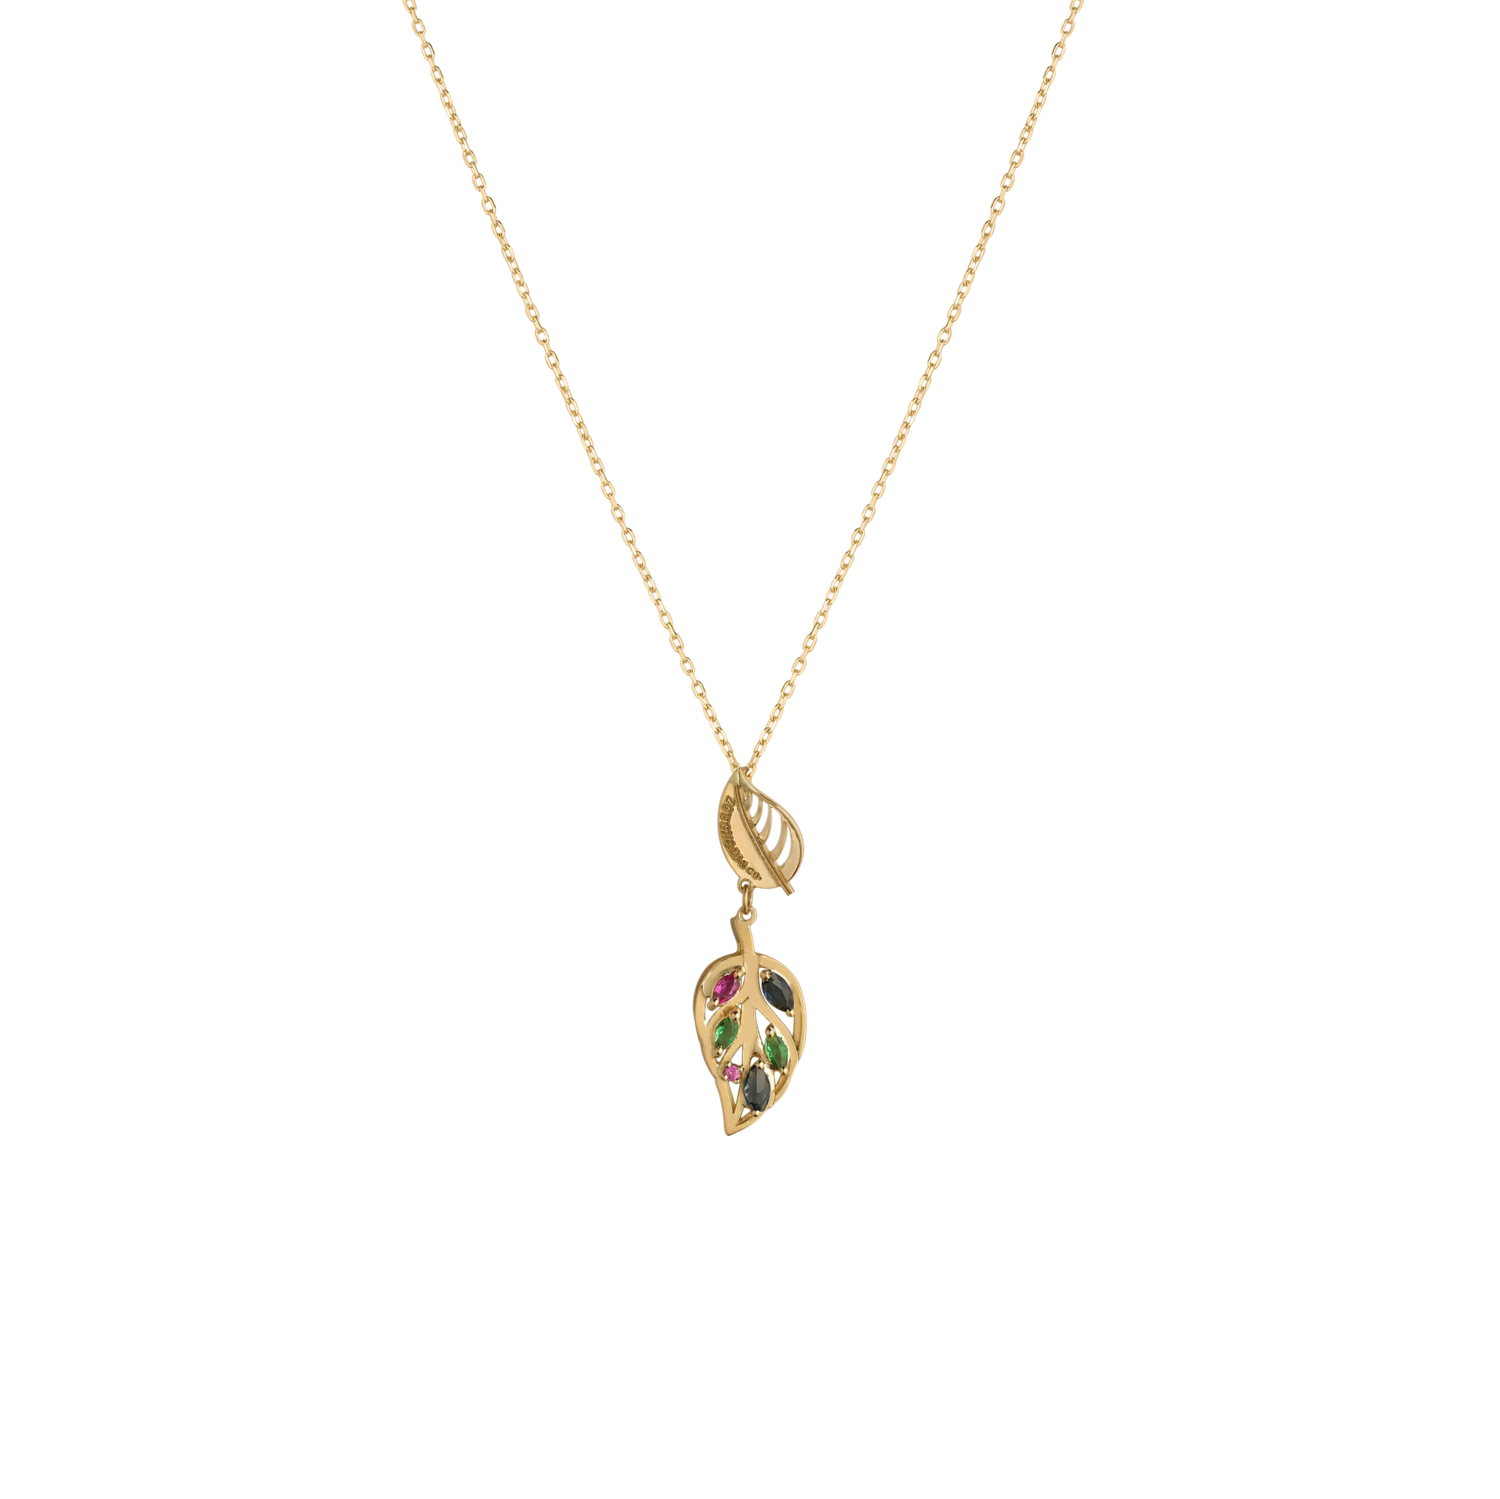 Leaves Gold Necklace with Colored Stones